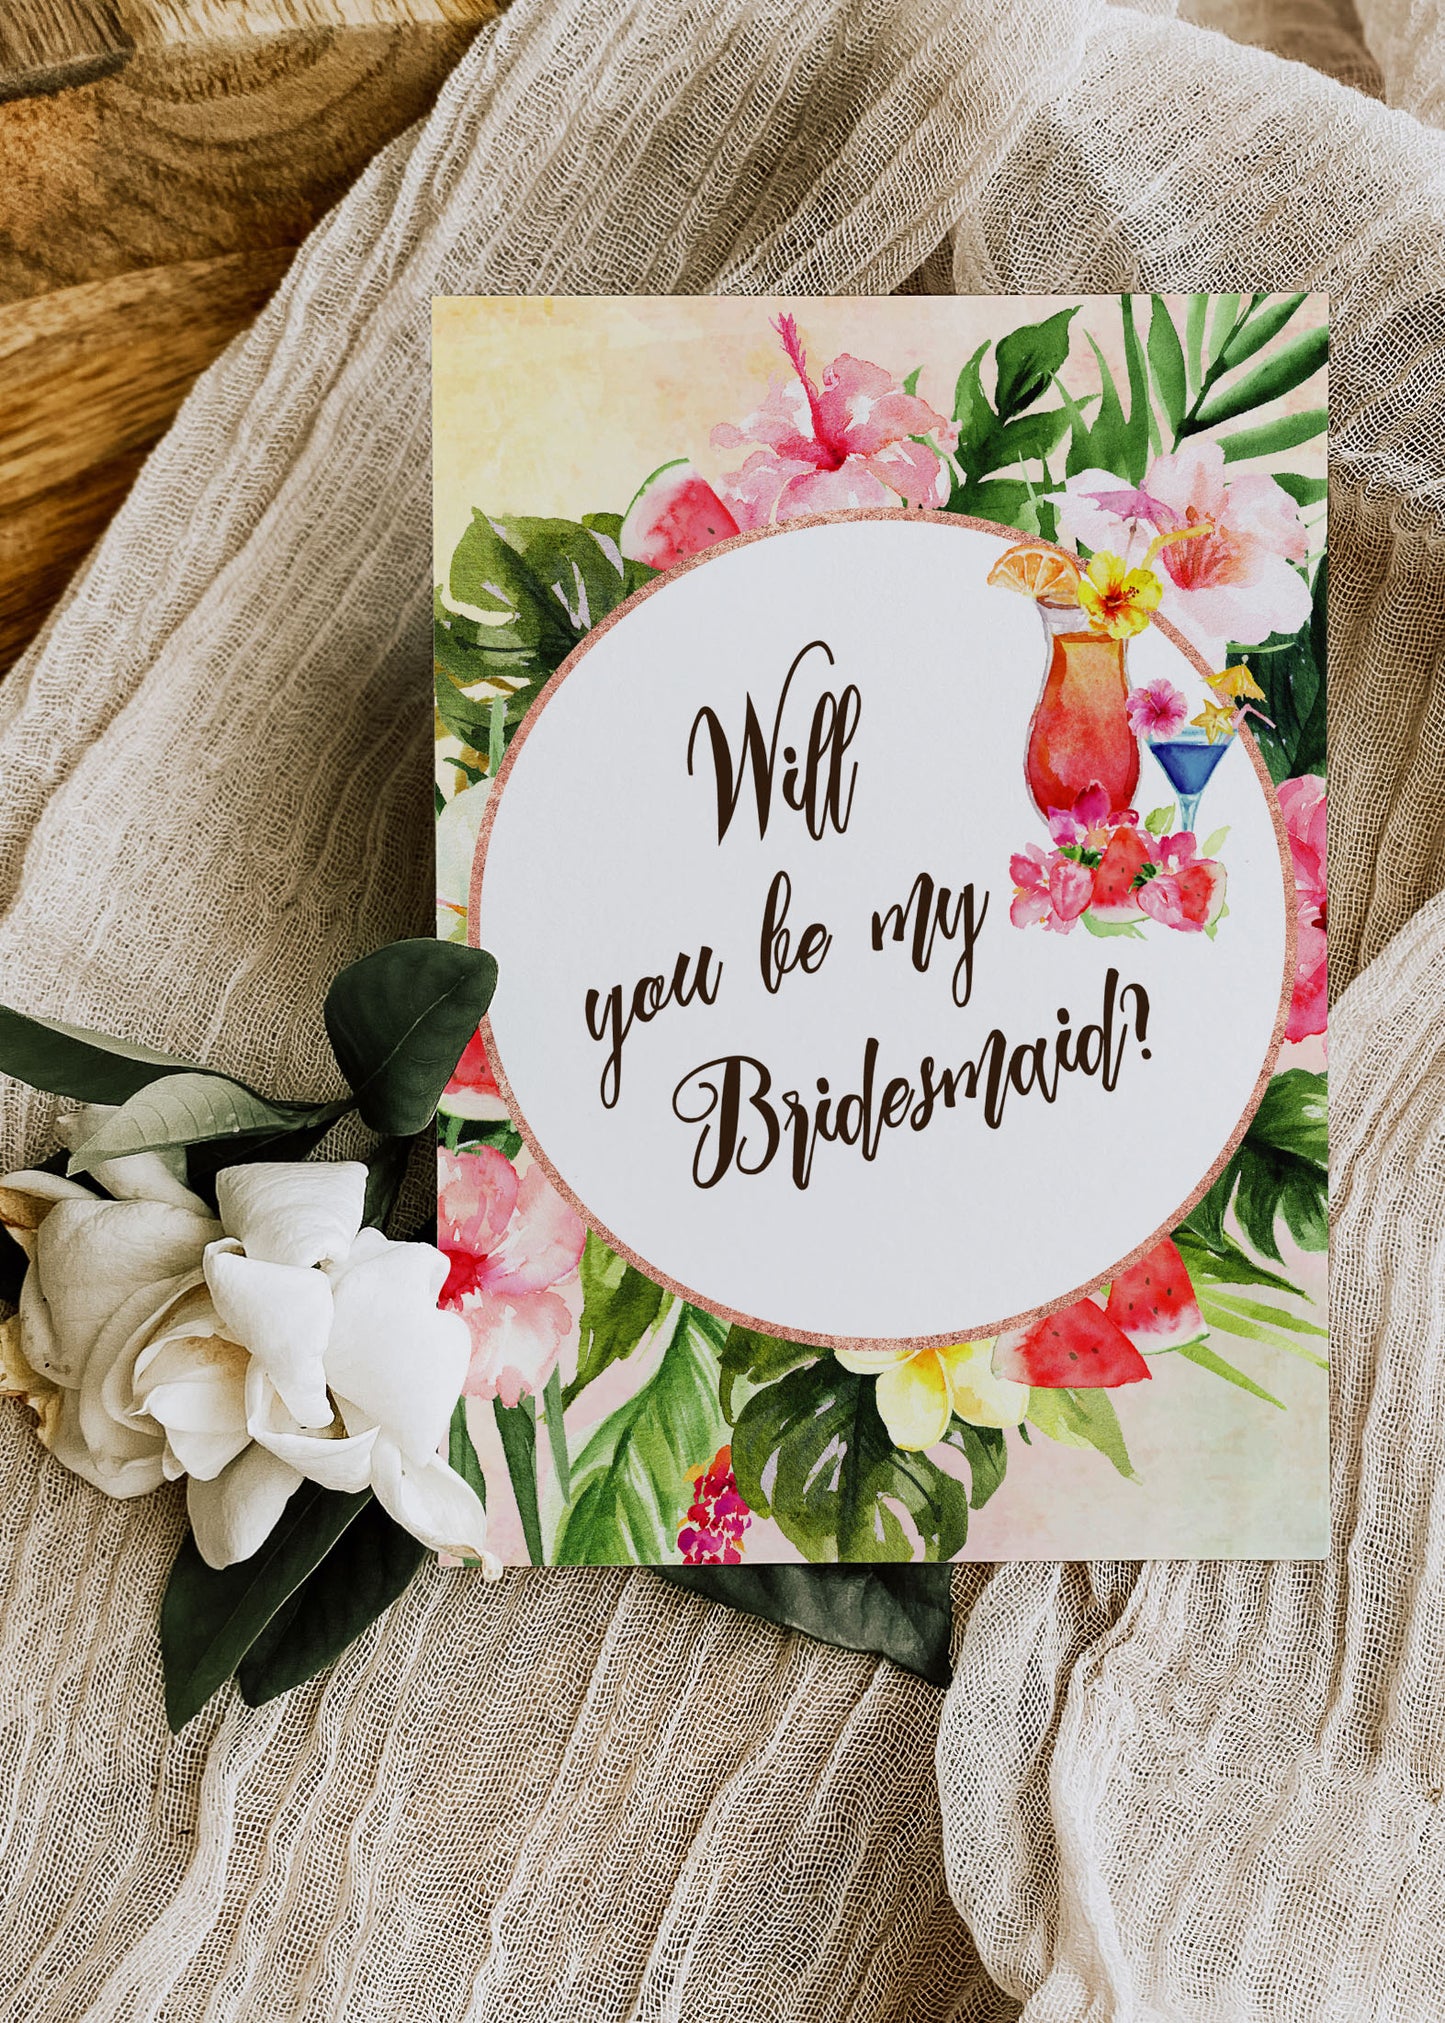 Tropical Floral Watercolor Beach Destination "Will you be my Bridesmaid" Digital "Instant Download" Invitation 5 - 'TROPICAL LUSH"